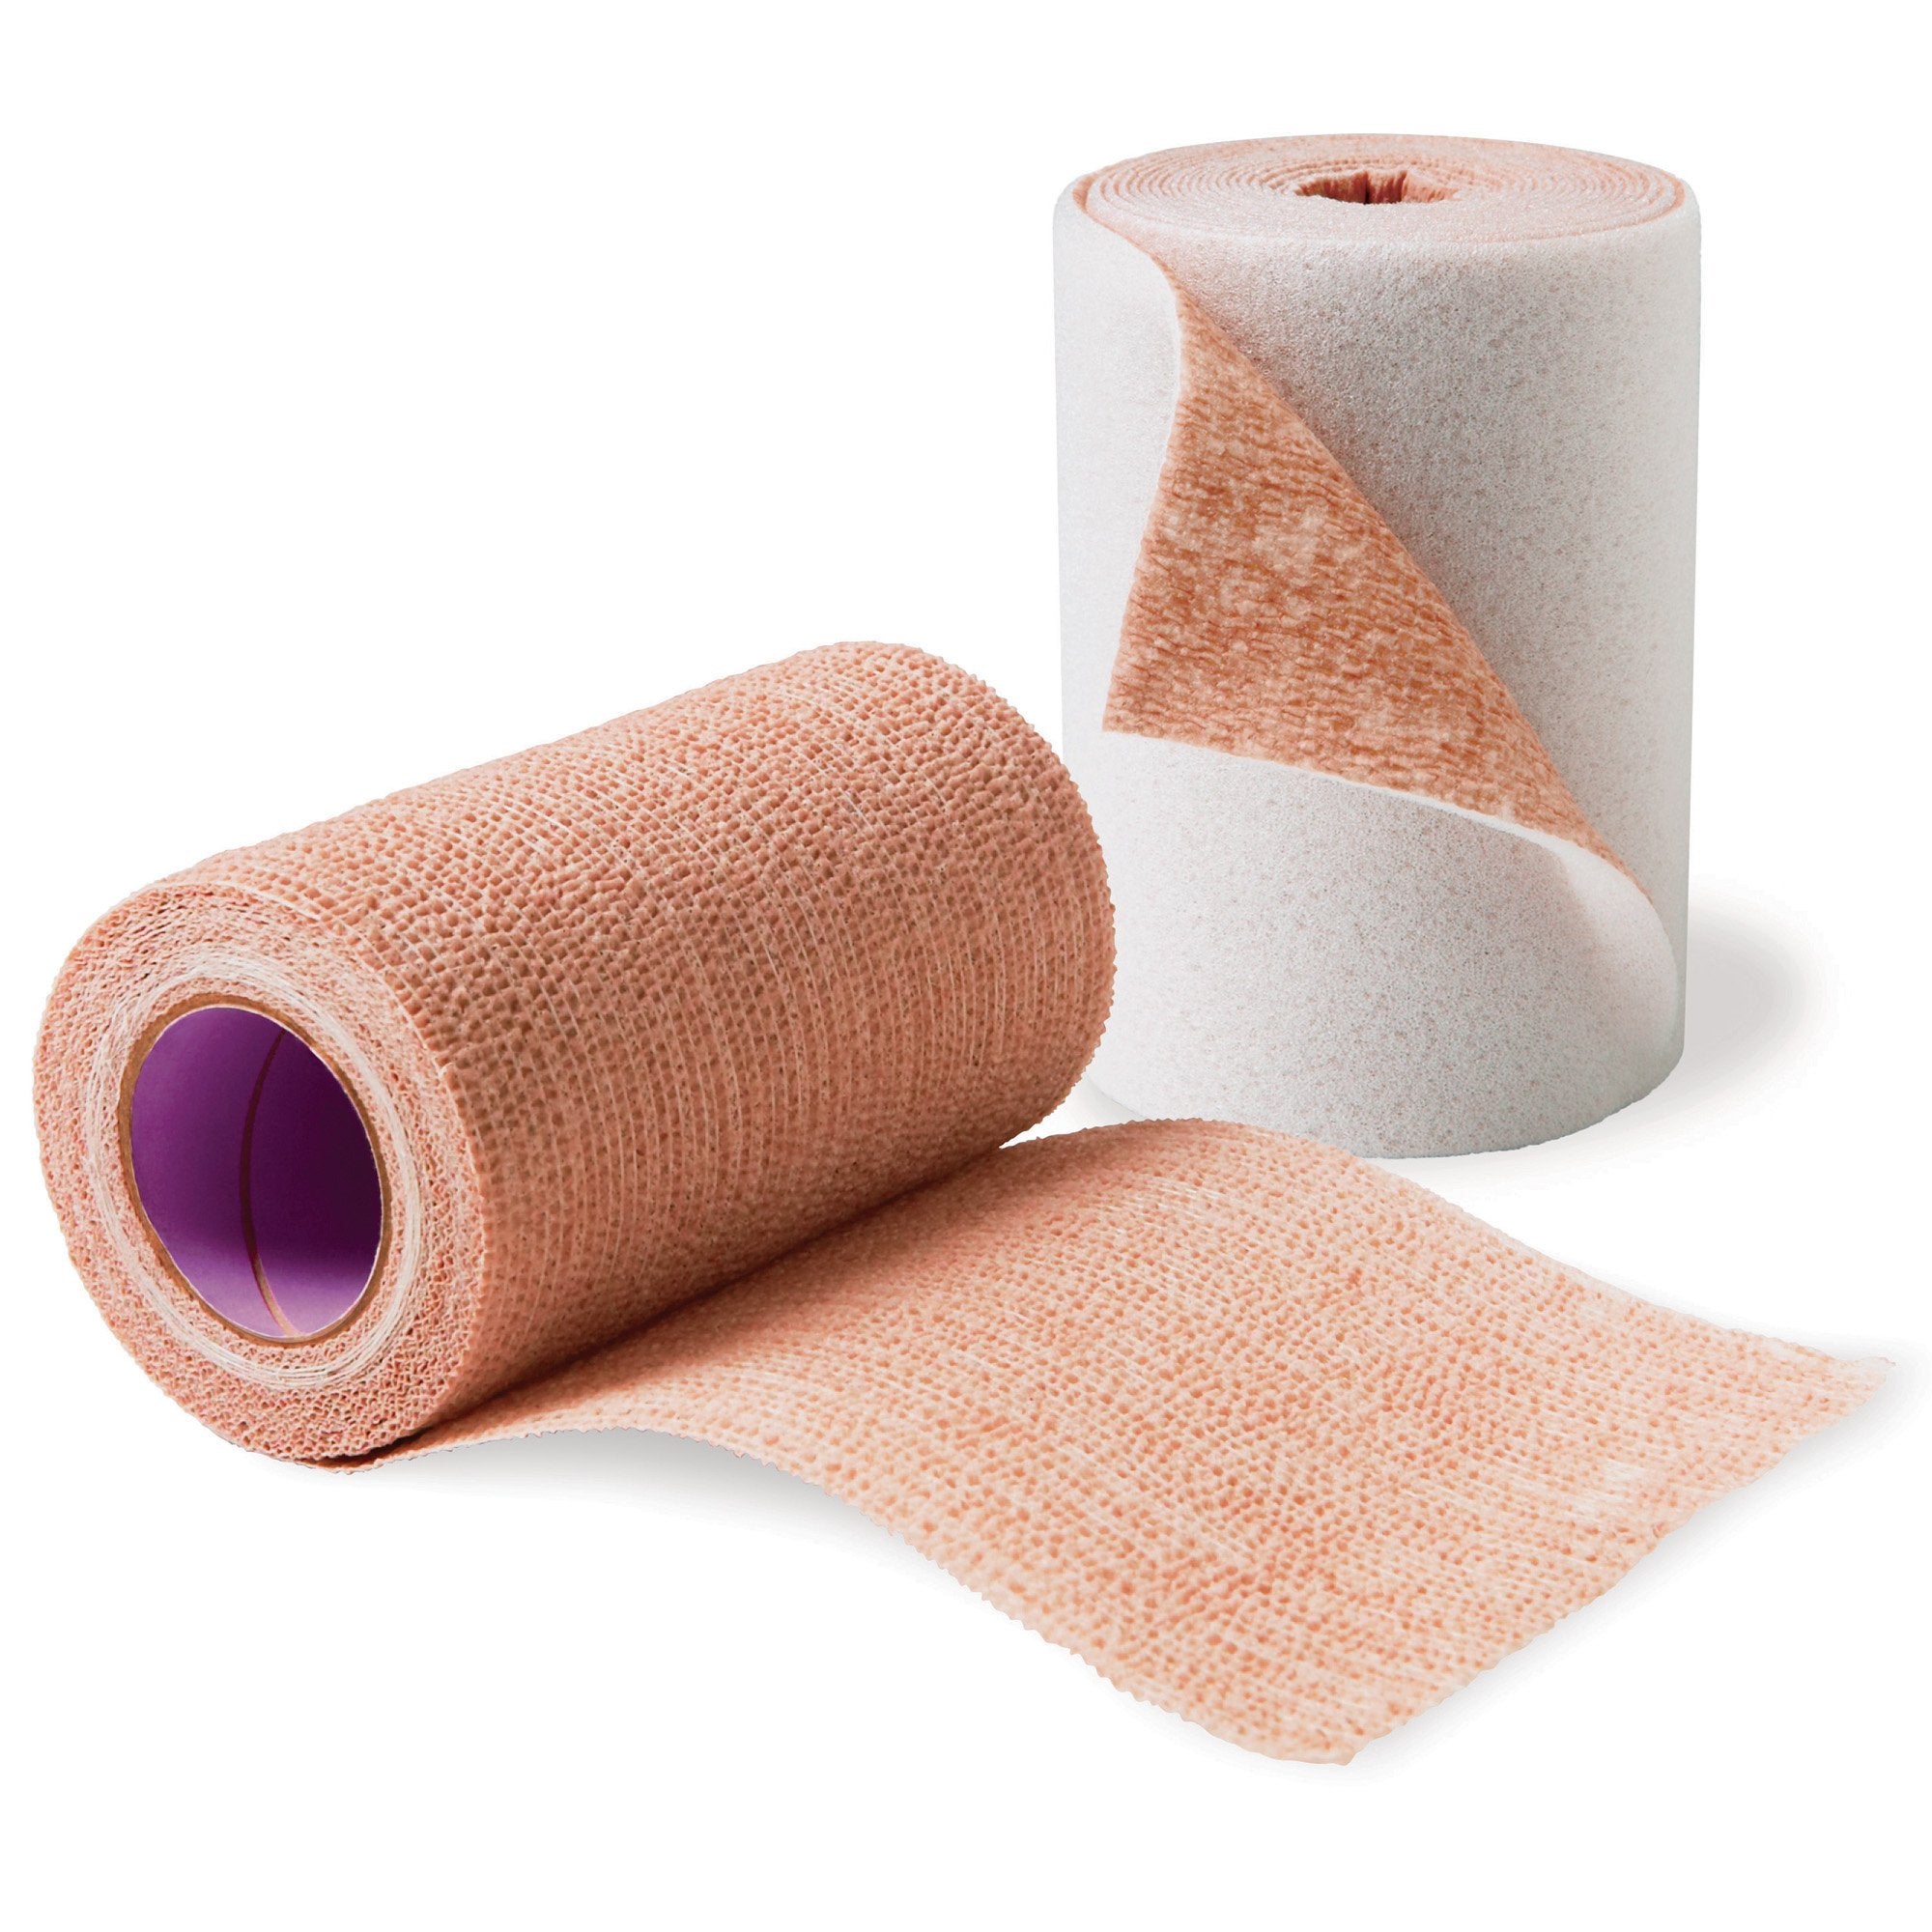 2 Layer Compression Bandage System 3M Coban 2 2-9/10 Yard X 4 Inch / 4 Inch X 5-1/10 Yard 35 to 40 mmHg Self-adherent / Pull On Closure Tan / White NonSterile